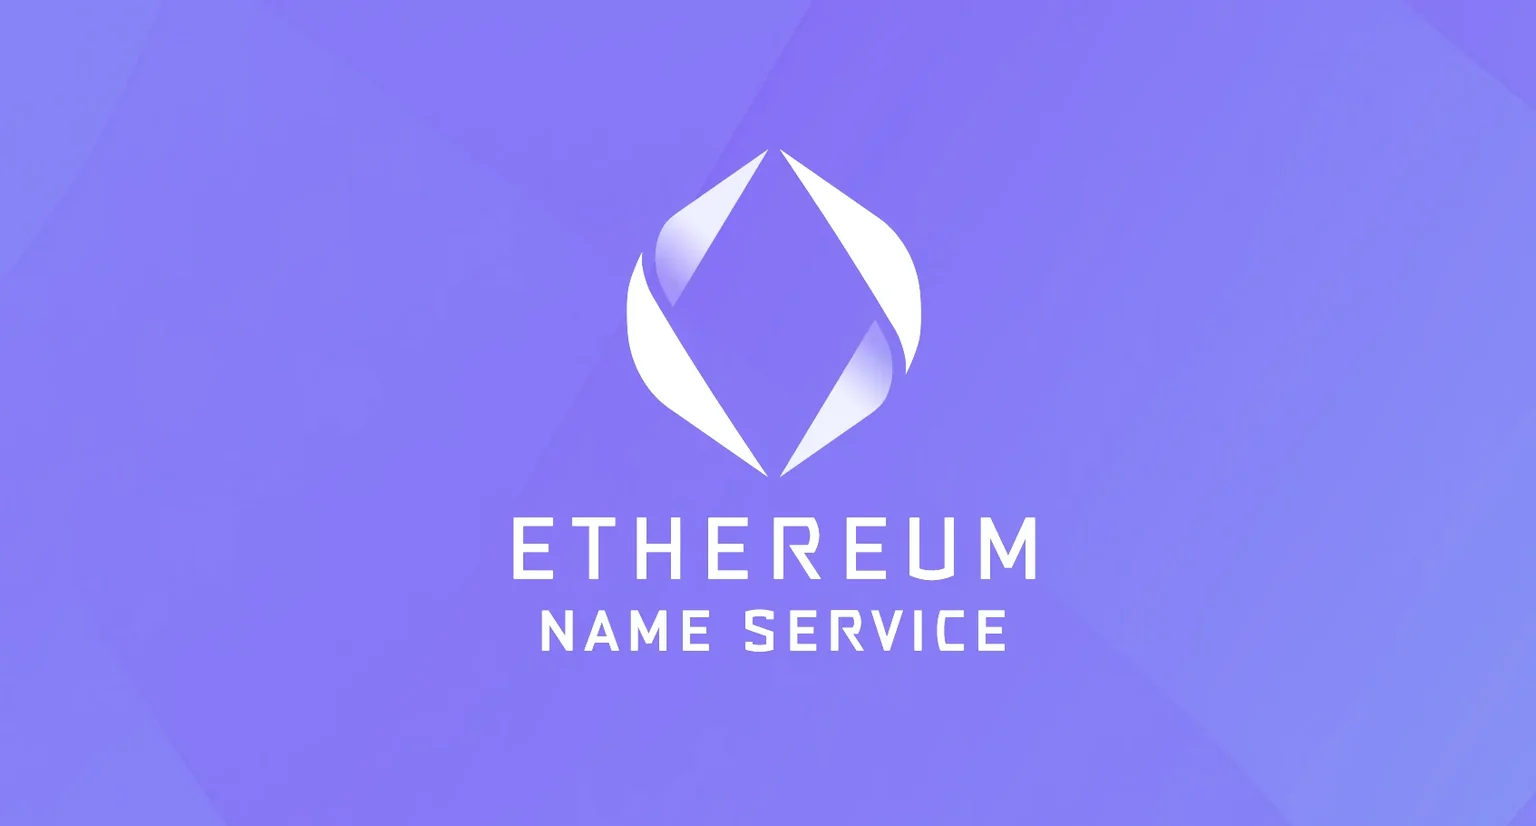 The Ethereum Name Service wants to make Ethereum easier to use. Image: Ethereum Name Service.